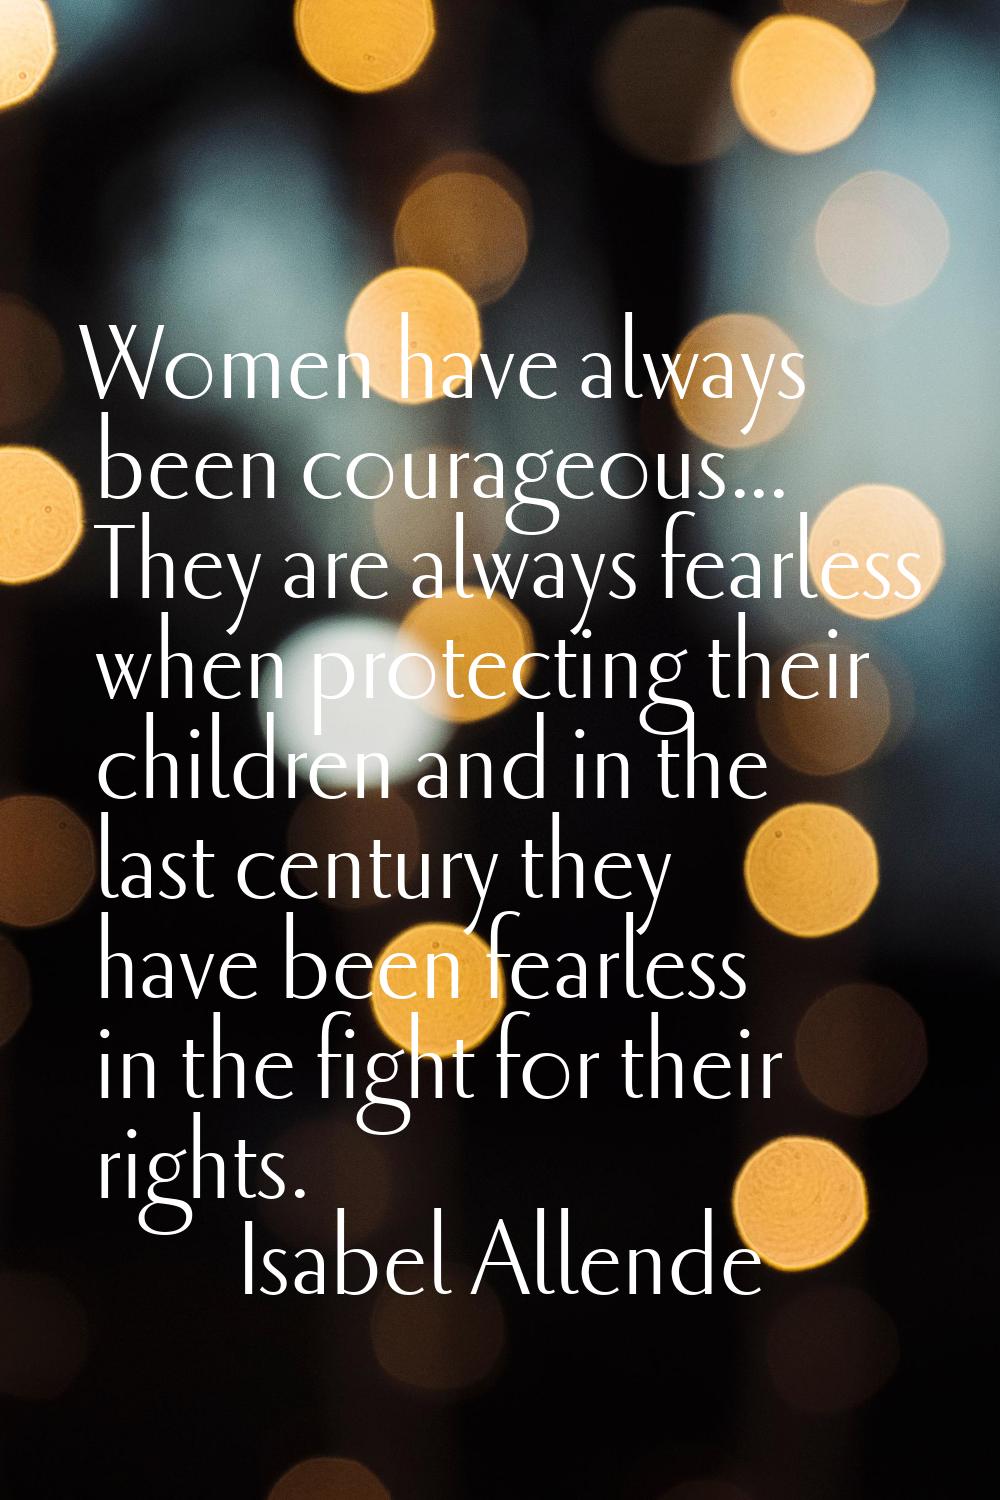 Women have always been courageous... They are always fearless when protecting their children and in